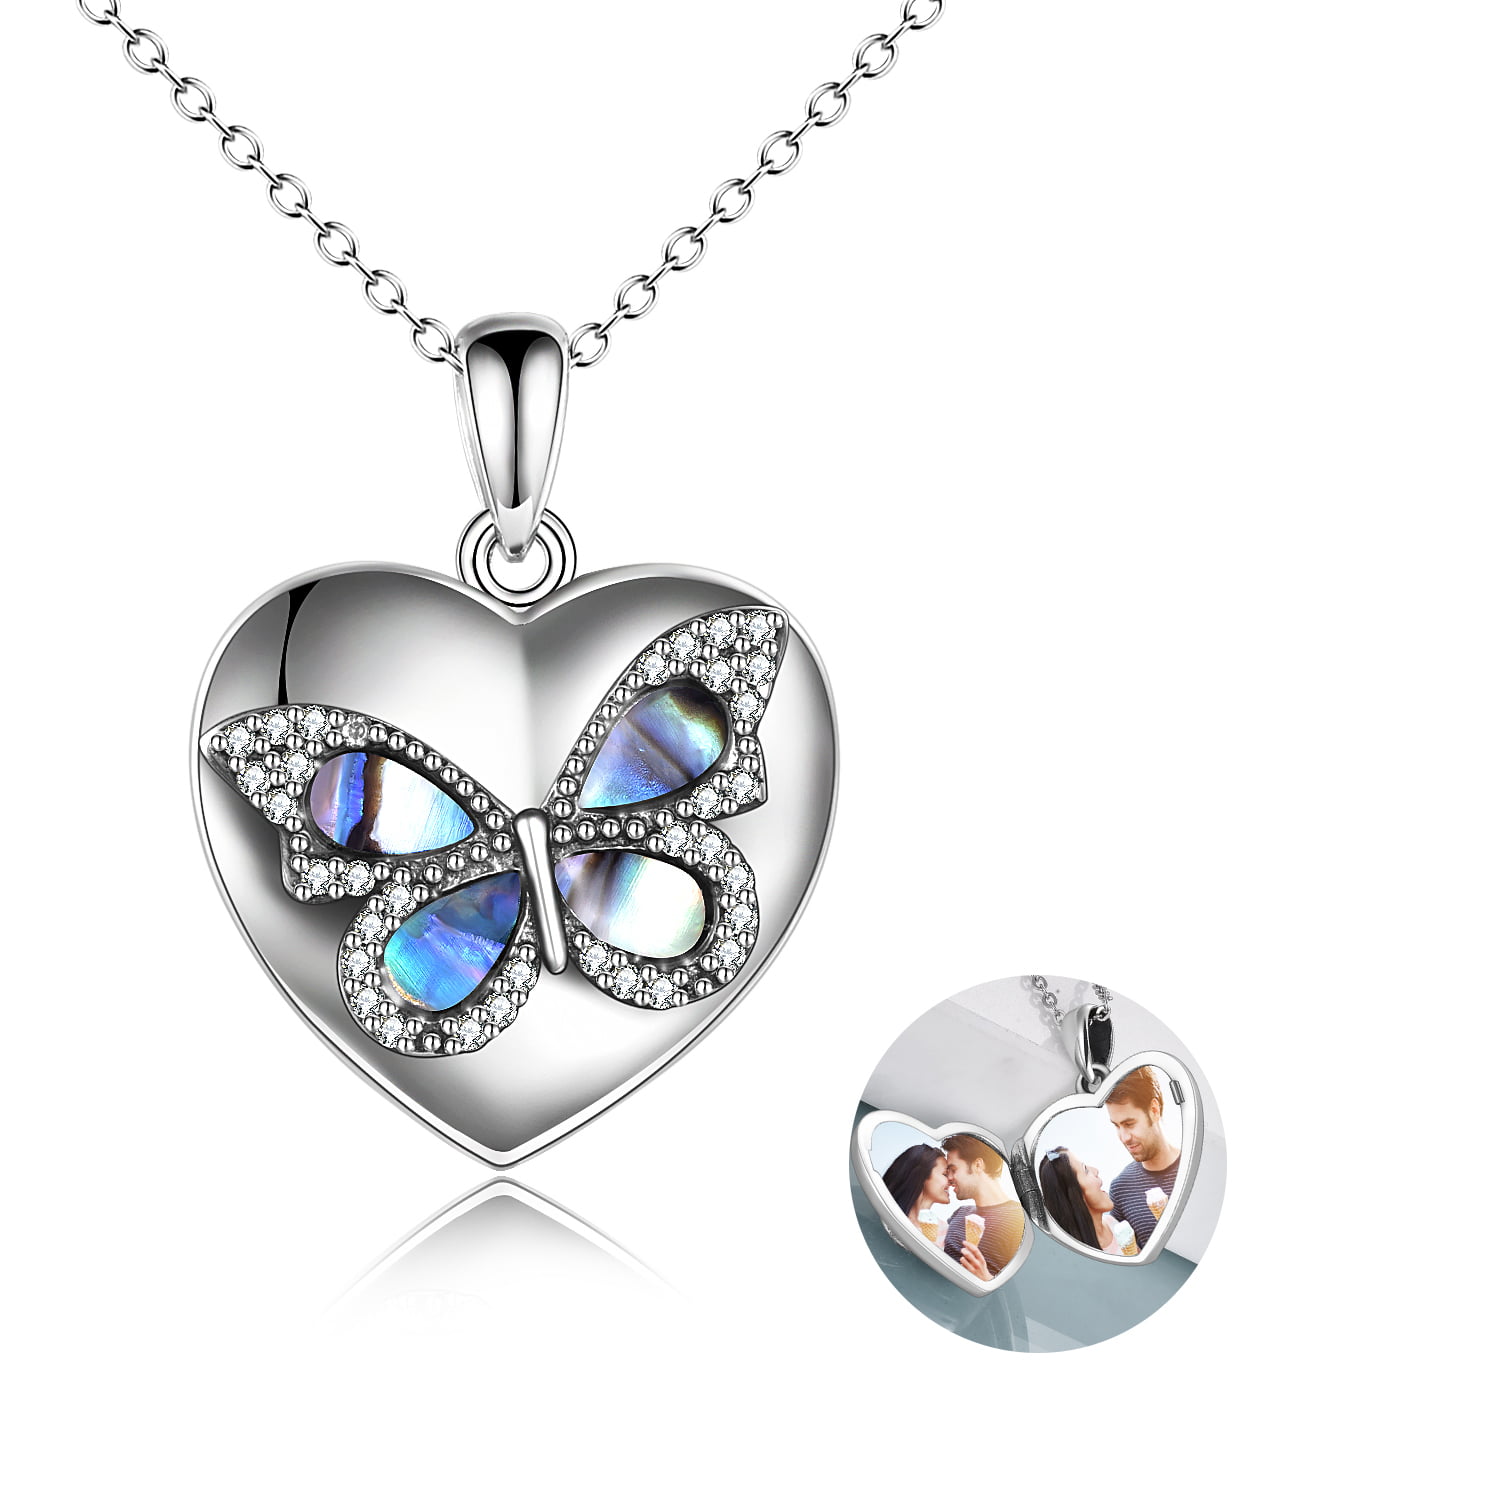 925 Sterling Silver Infinity Butterfly Pendant with Crystal Charm Jewelry Accessory for Women Girlfriend Anniversary Gift